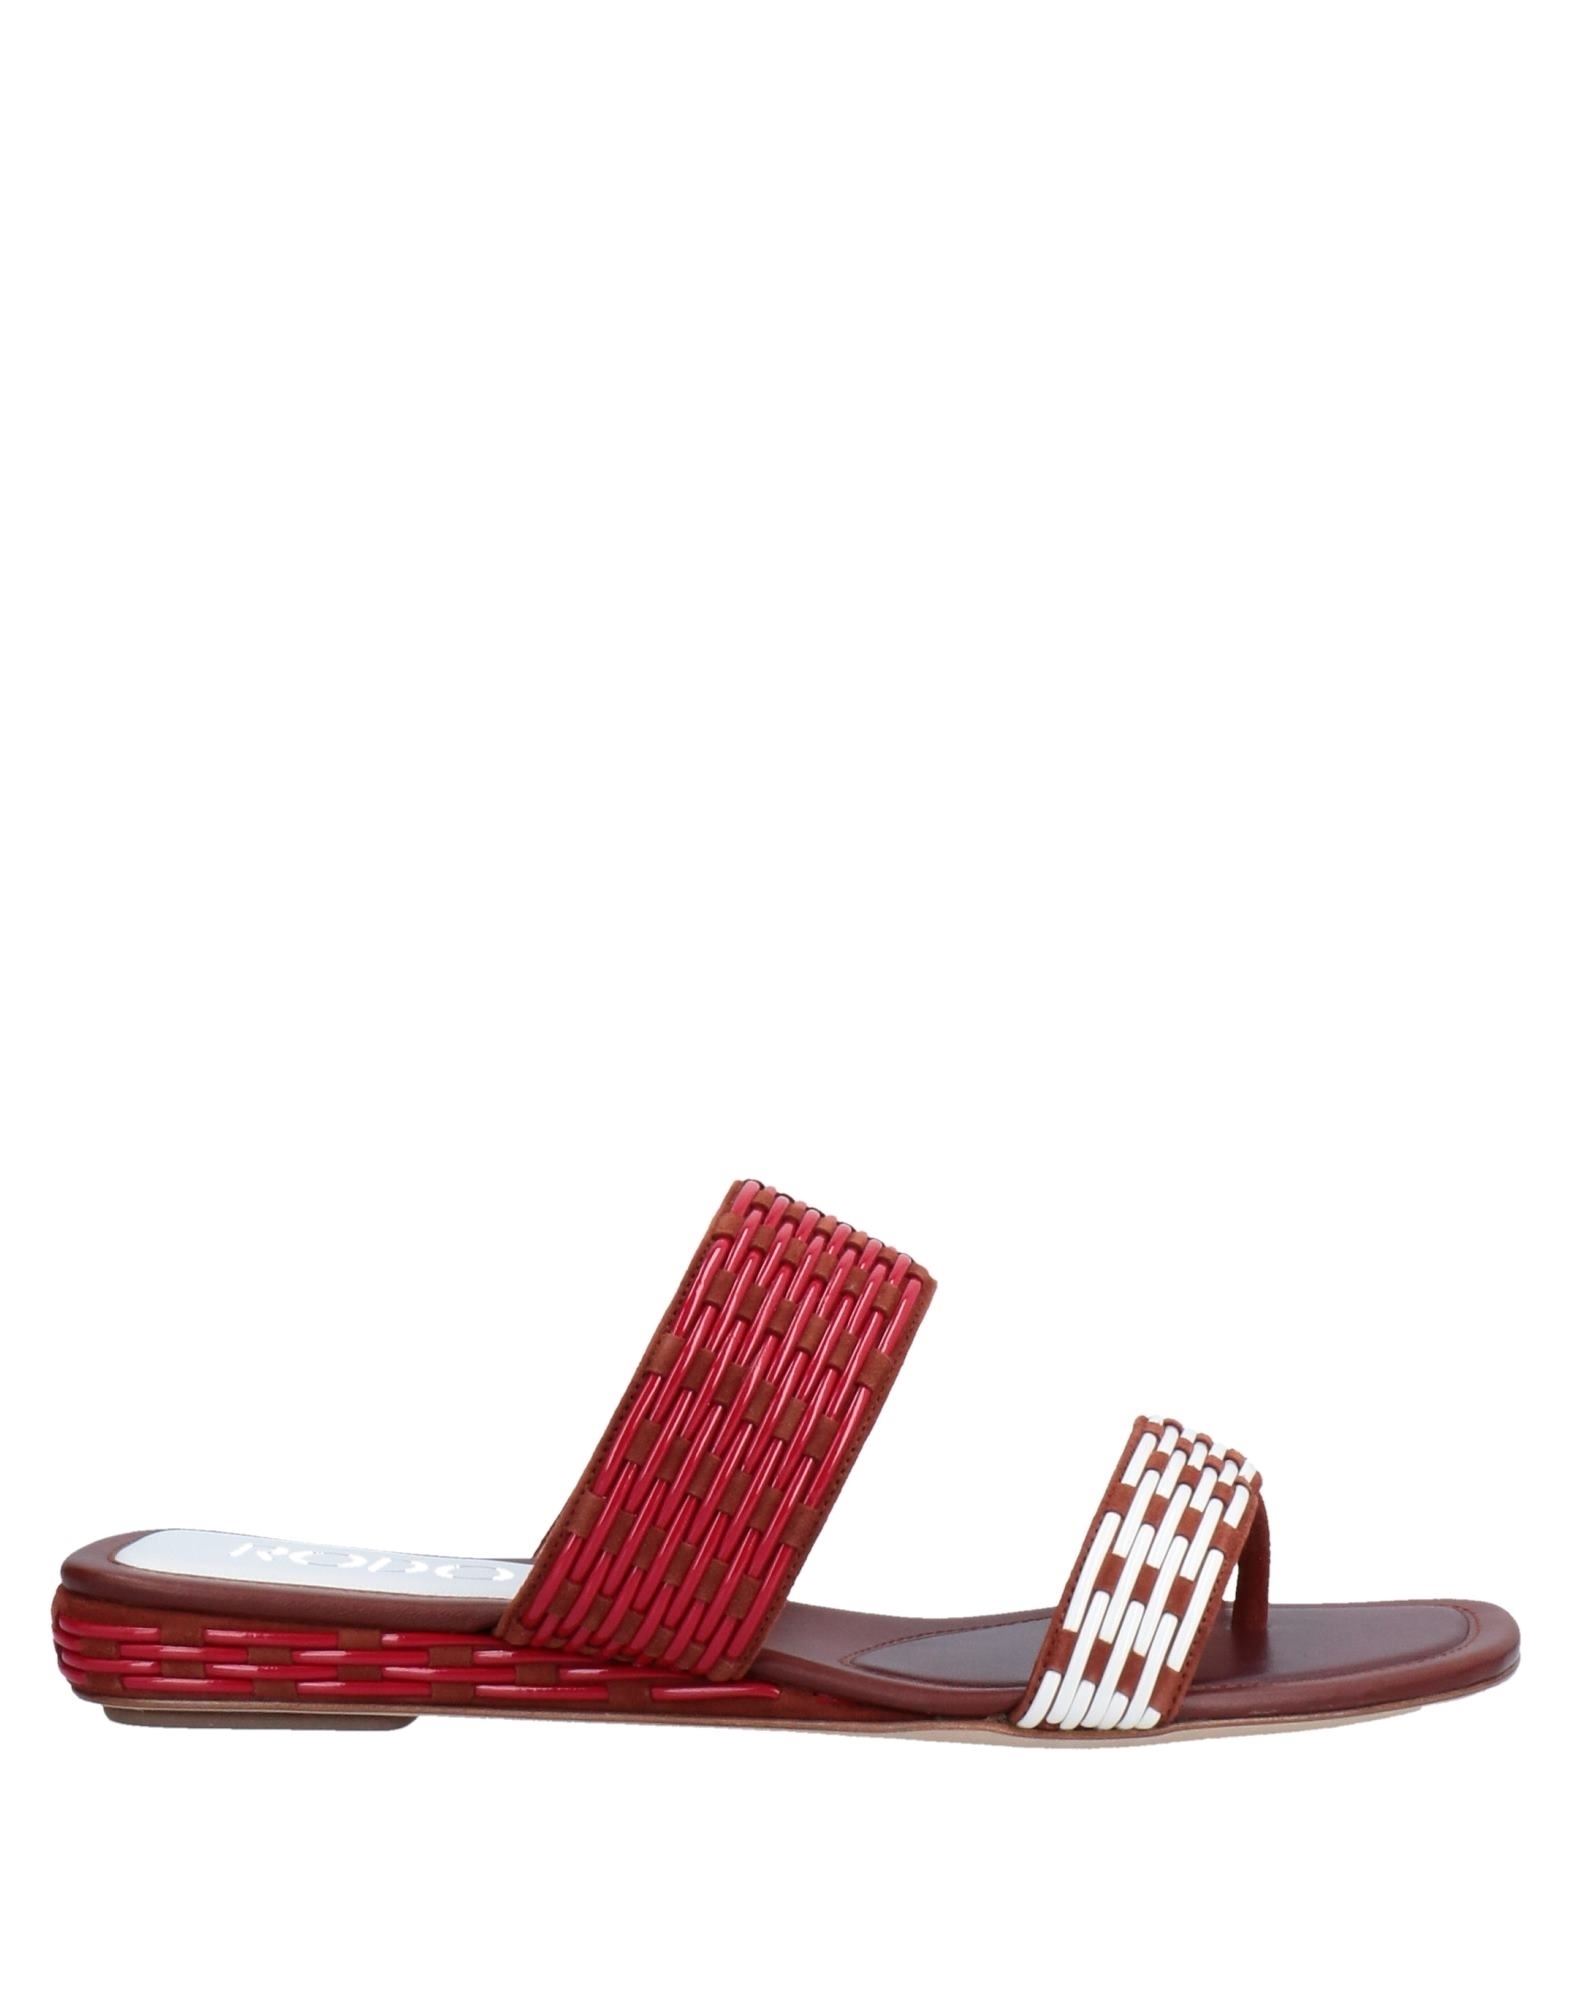 RODO RODO WOMAN SANDALS RED SIZE 10 SOFT LEATHER